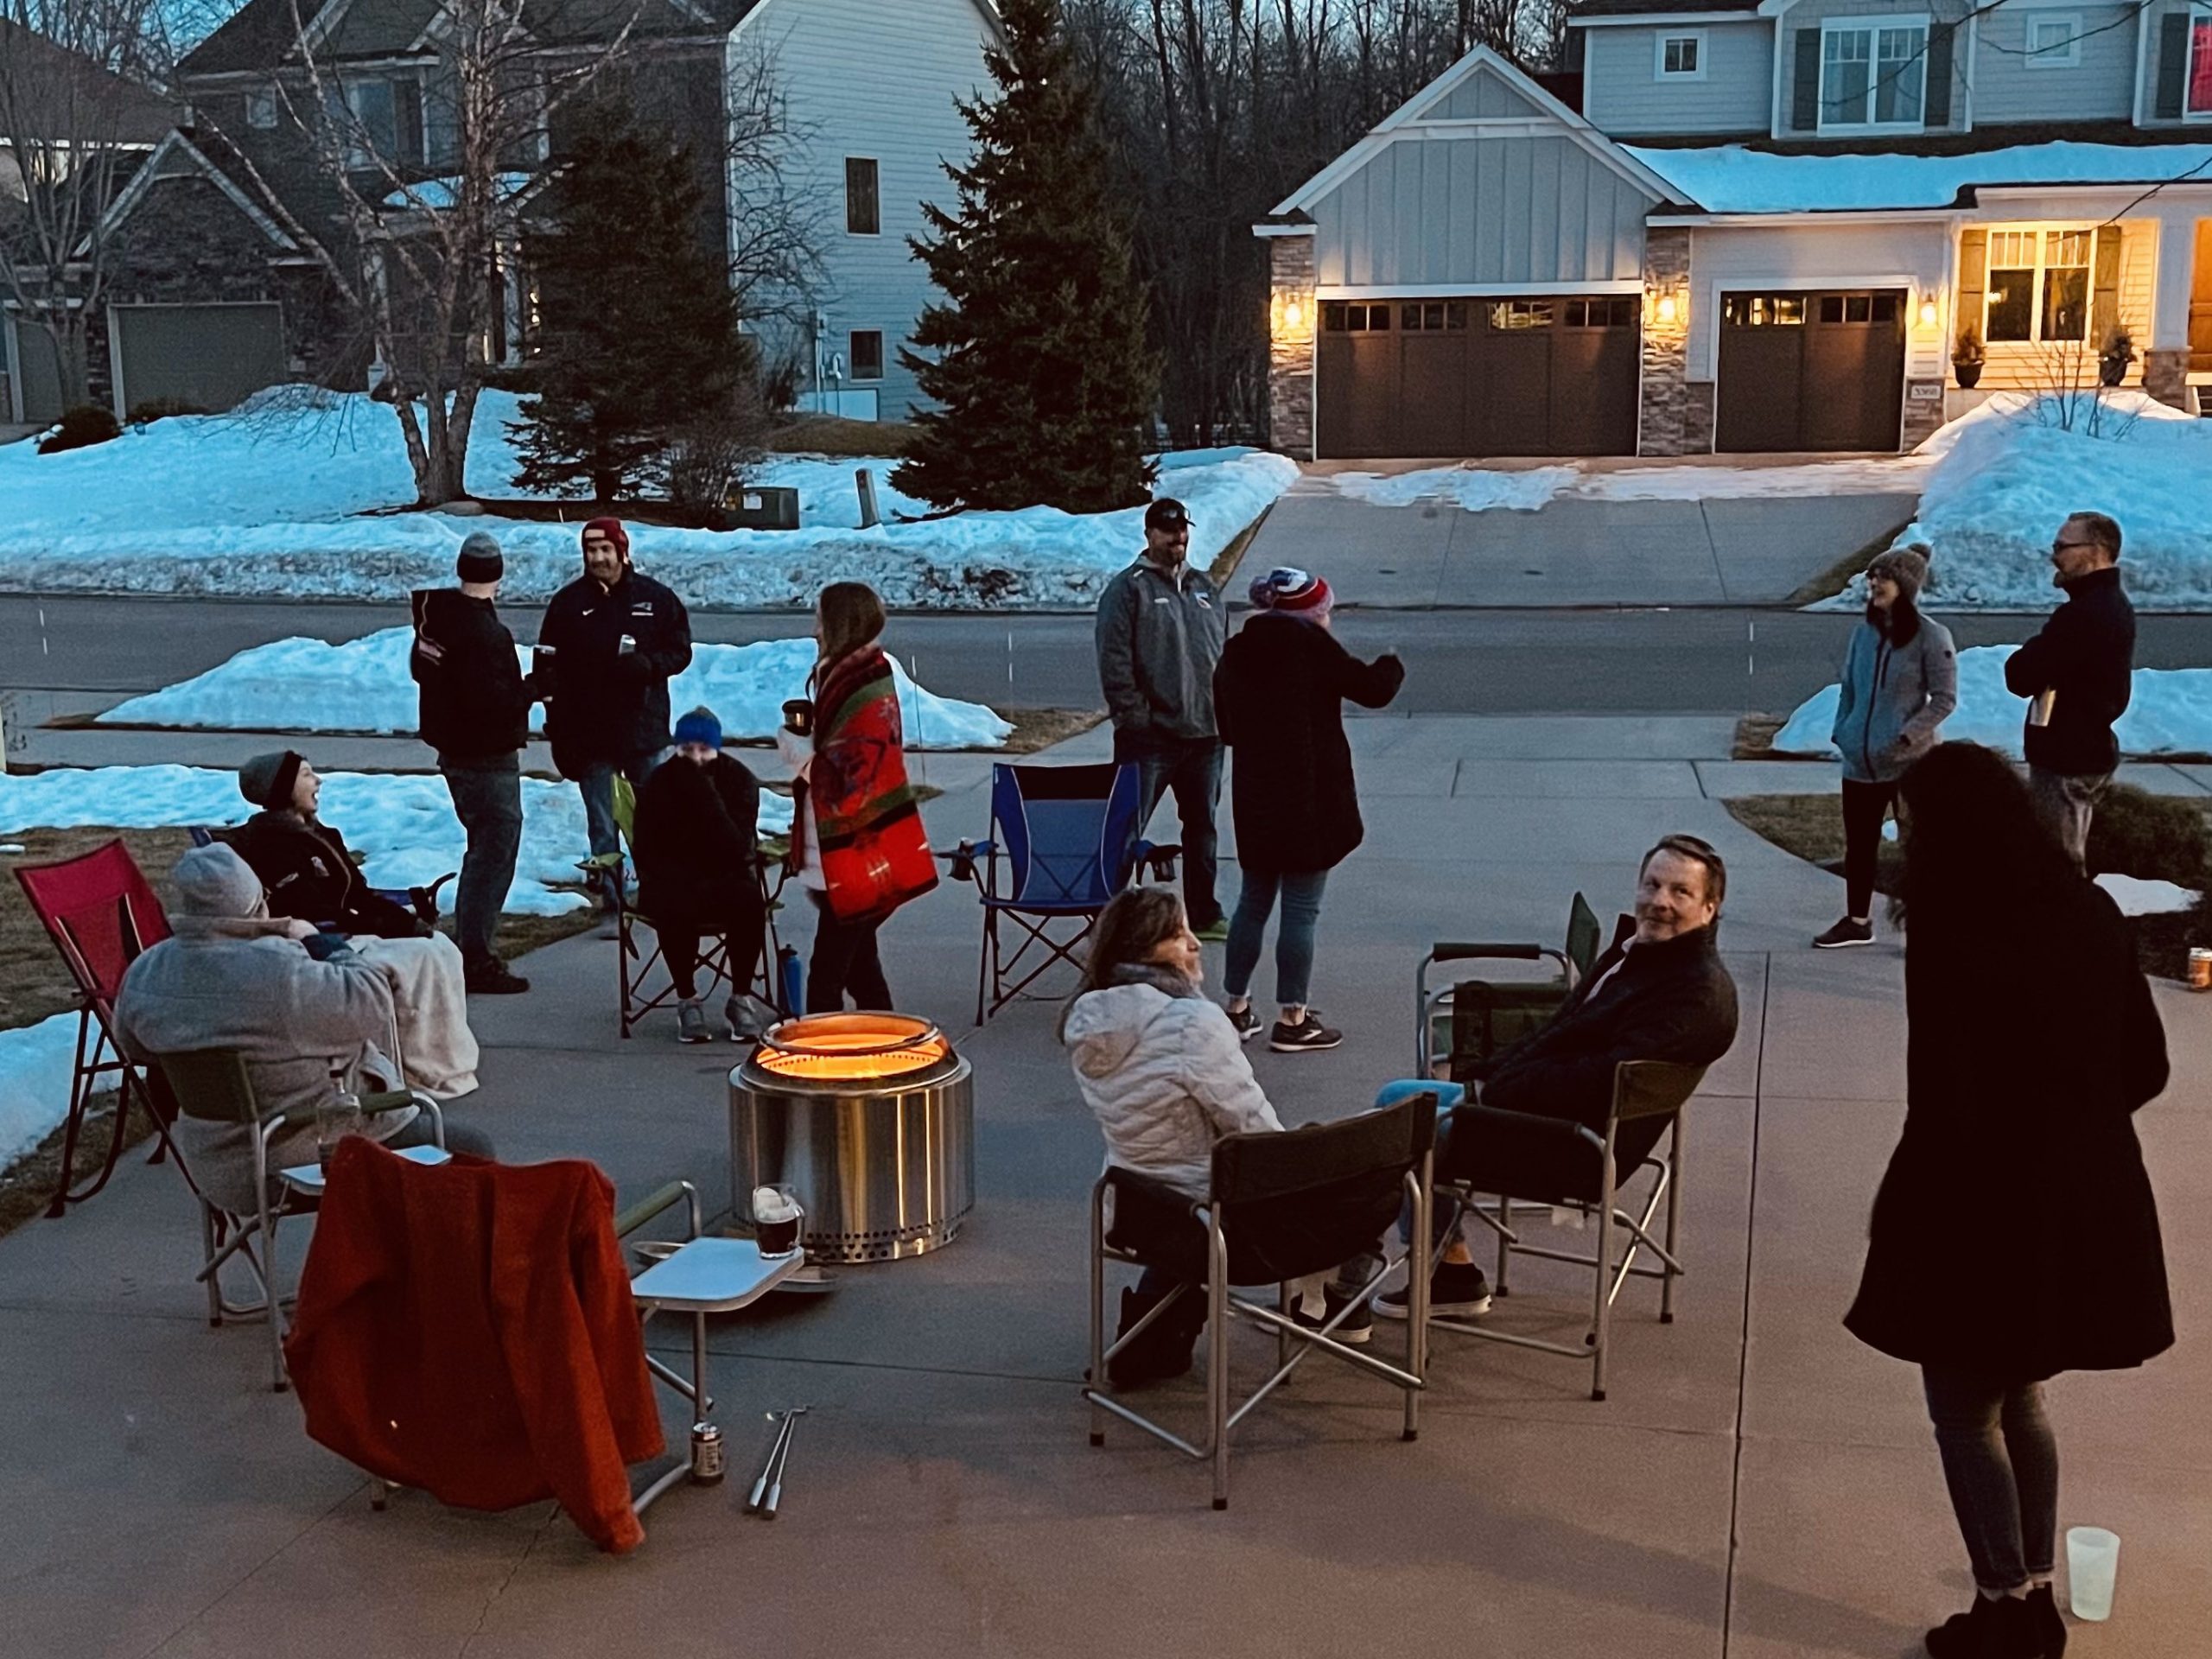 Several people are gathering around a fire pit in a dirveway. There is snow on the ground, and it's a fun cheerful scene.